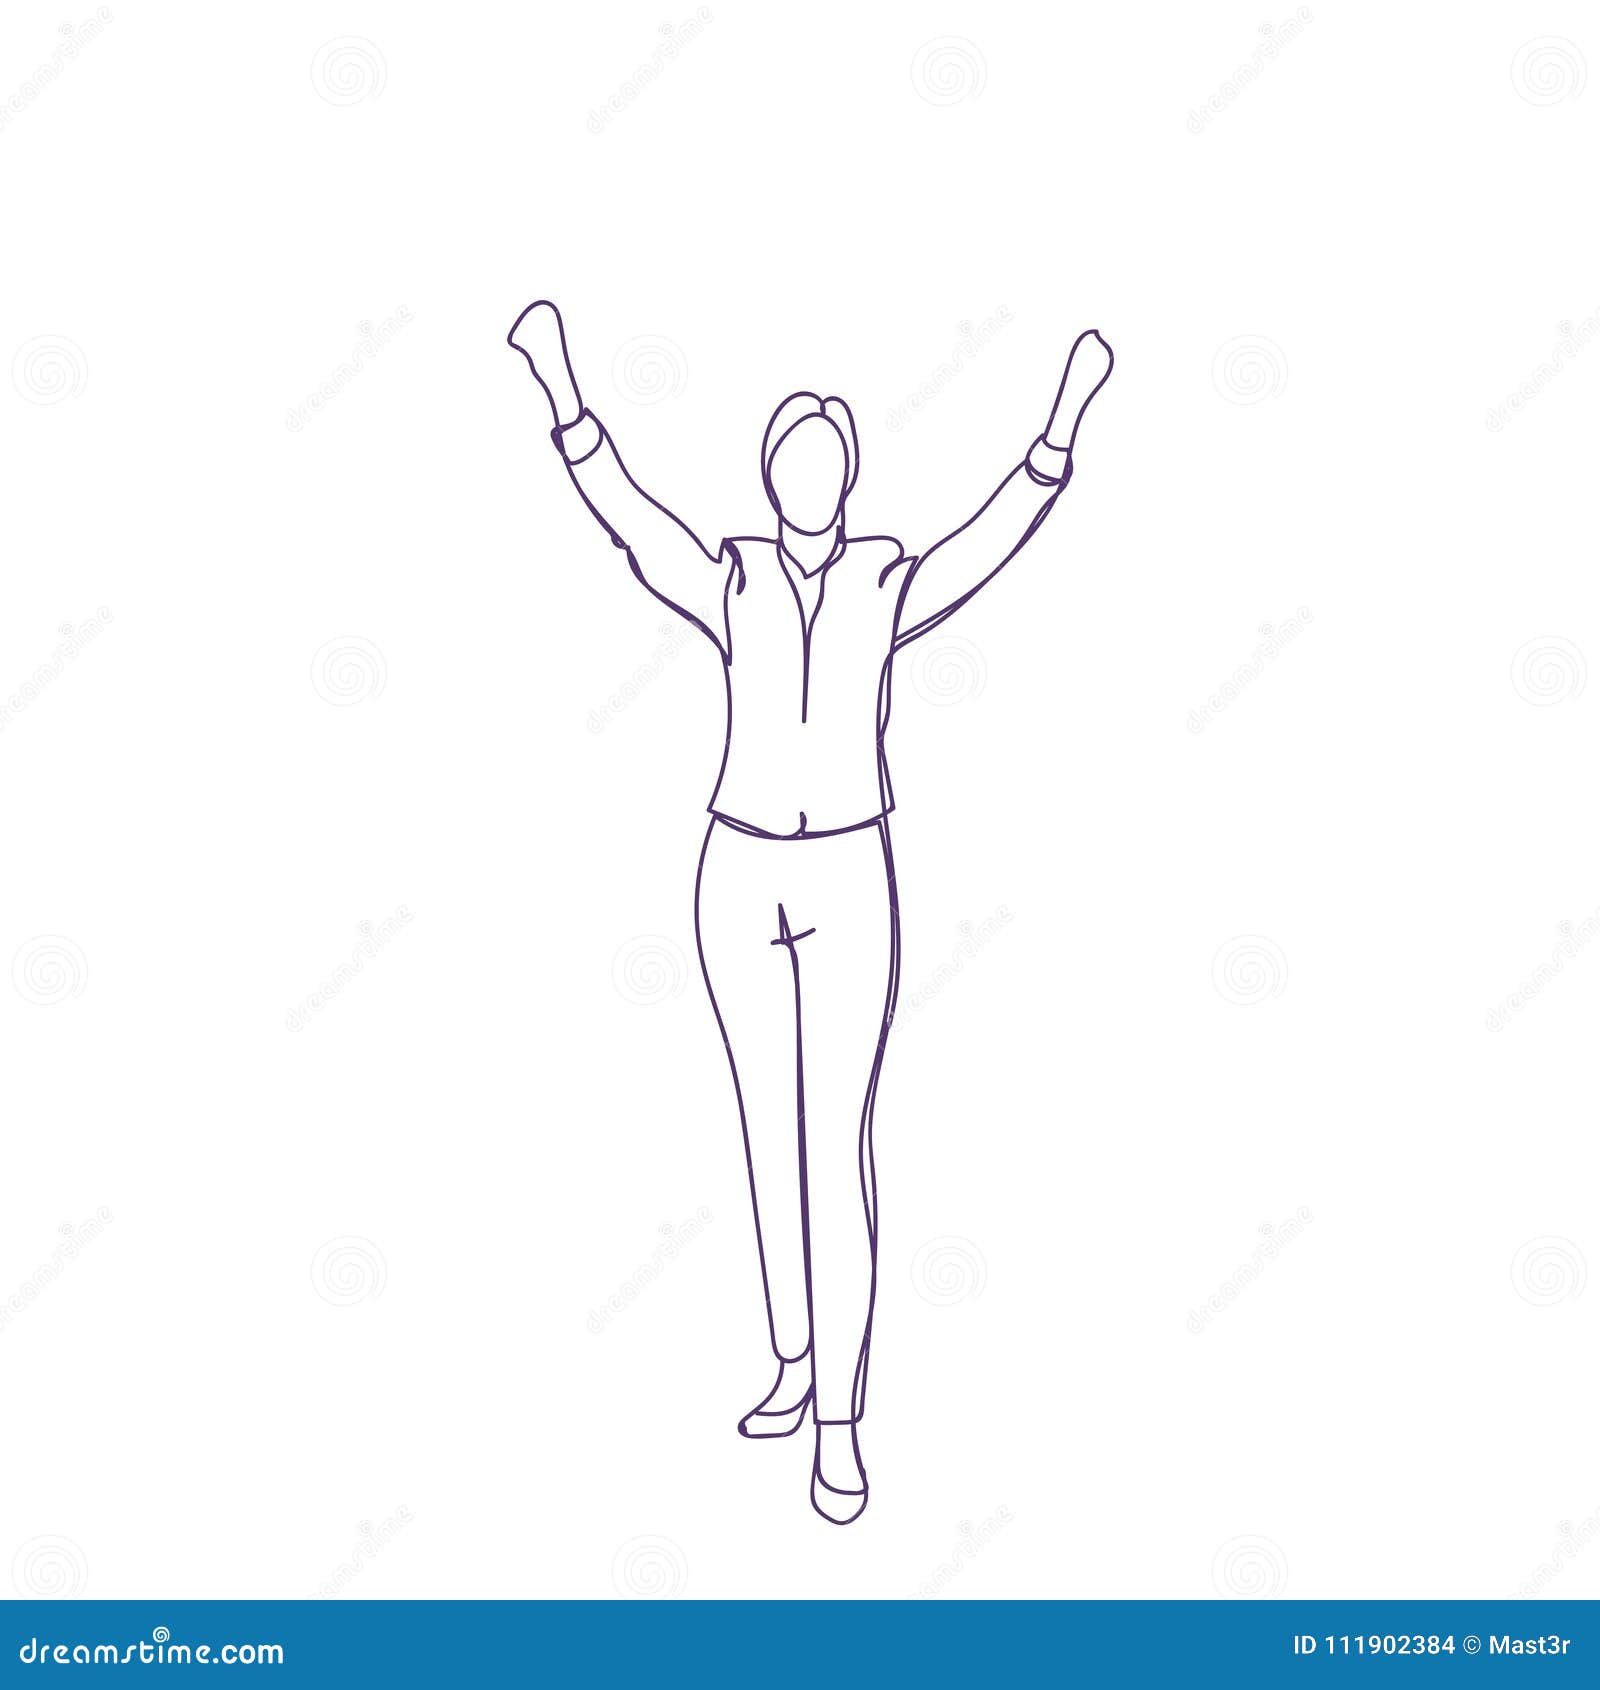 Cheerful Business Person Holding Hands Raised Female Or Male Silhouette Sketch On White Background Stock Vector Illustration Of Female Manager